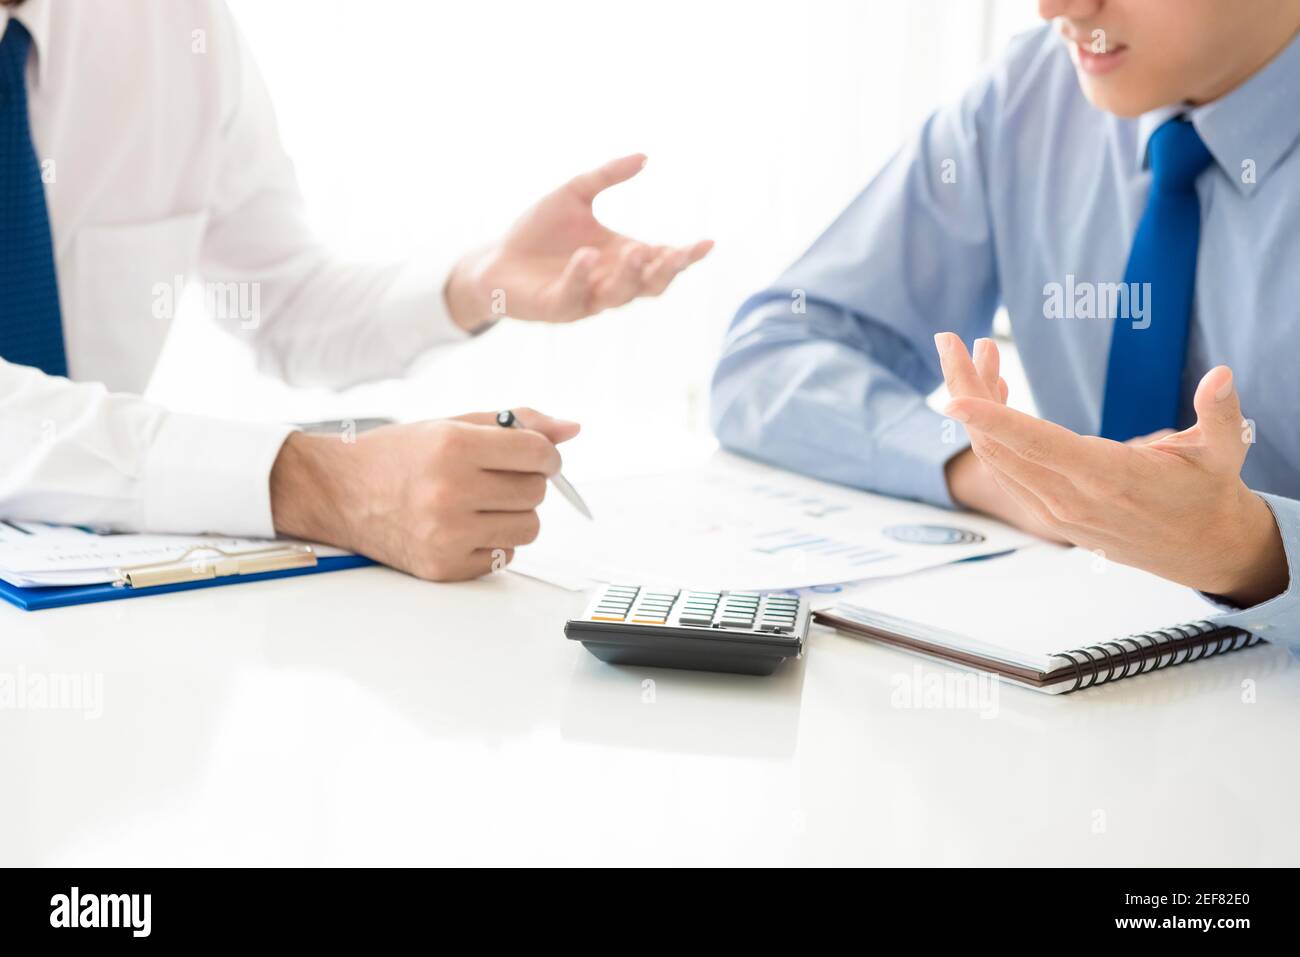 Businessmen discussing and analyzing financial documents Stock Photo